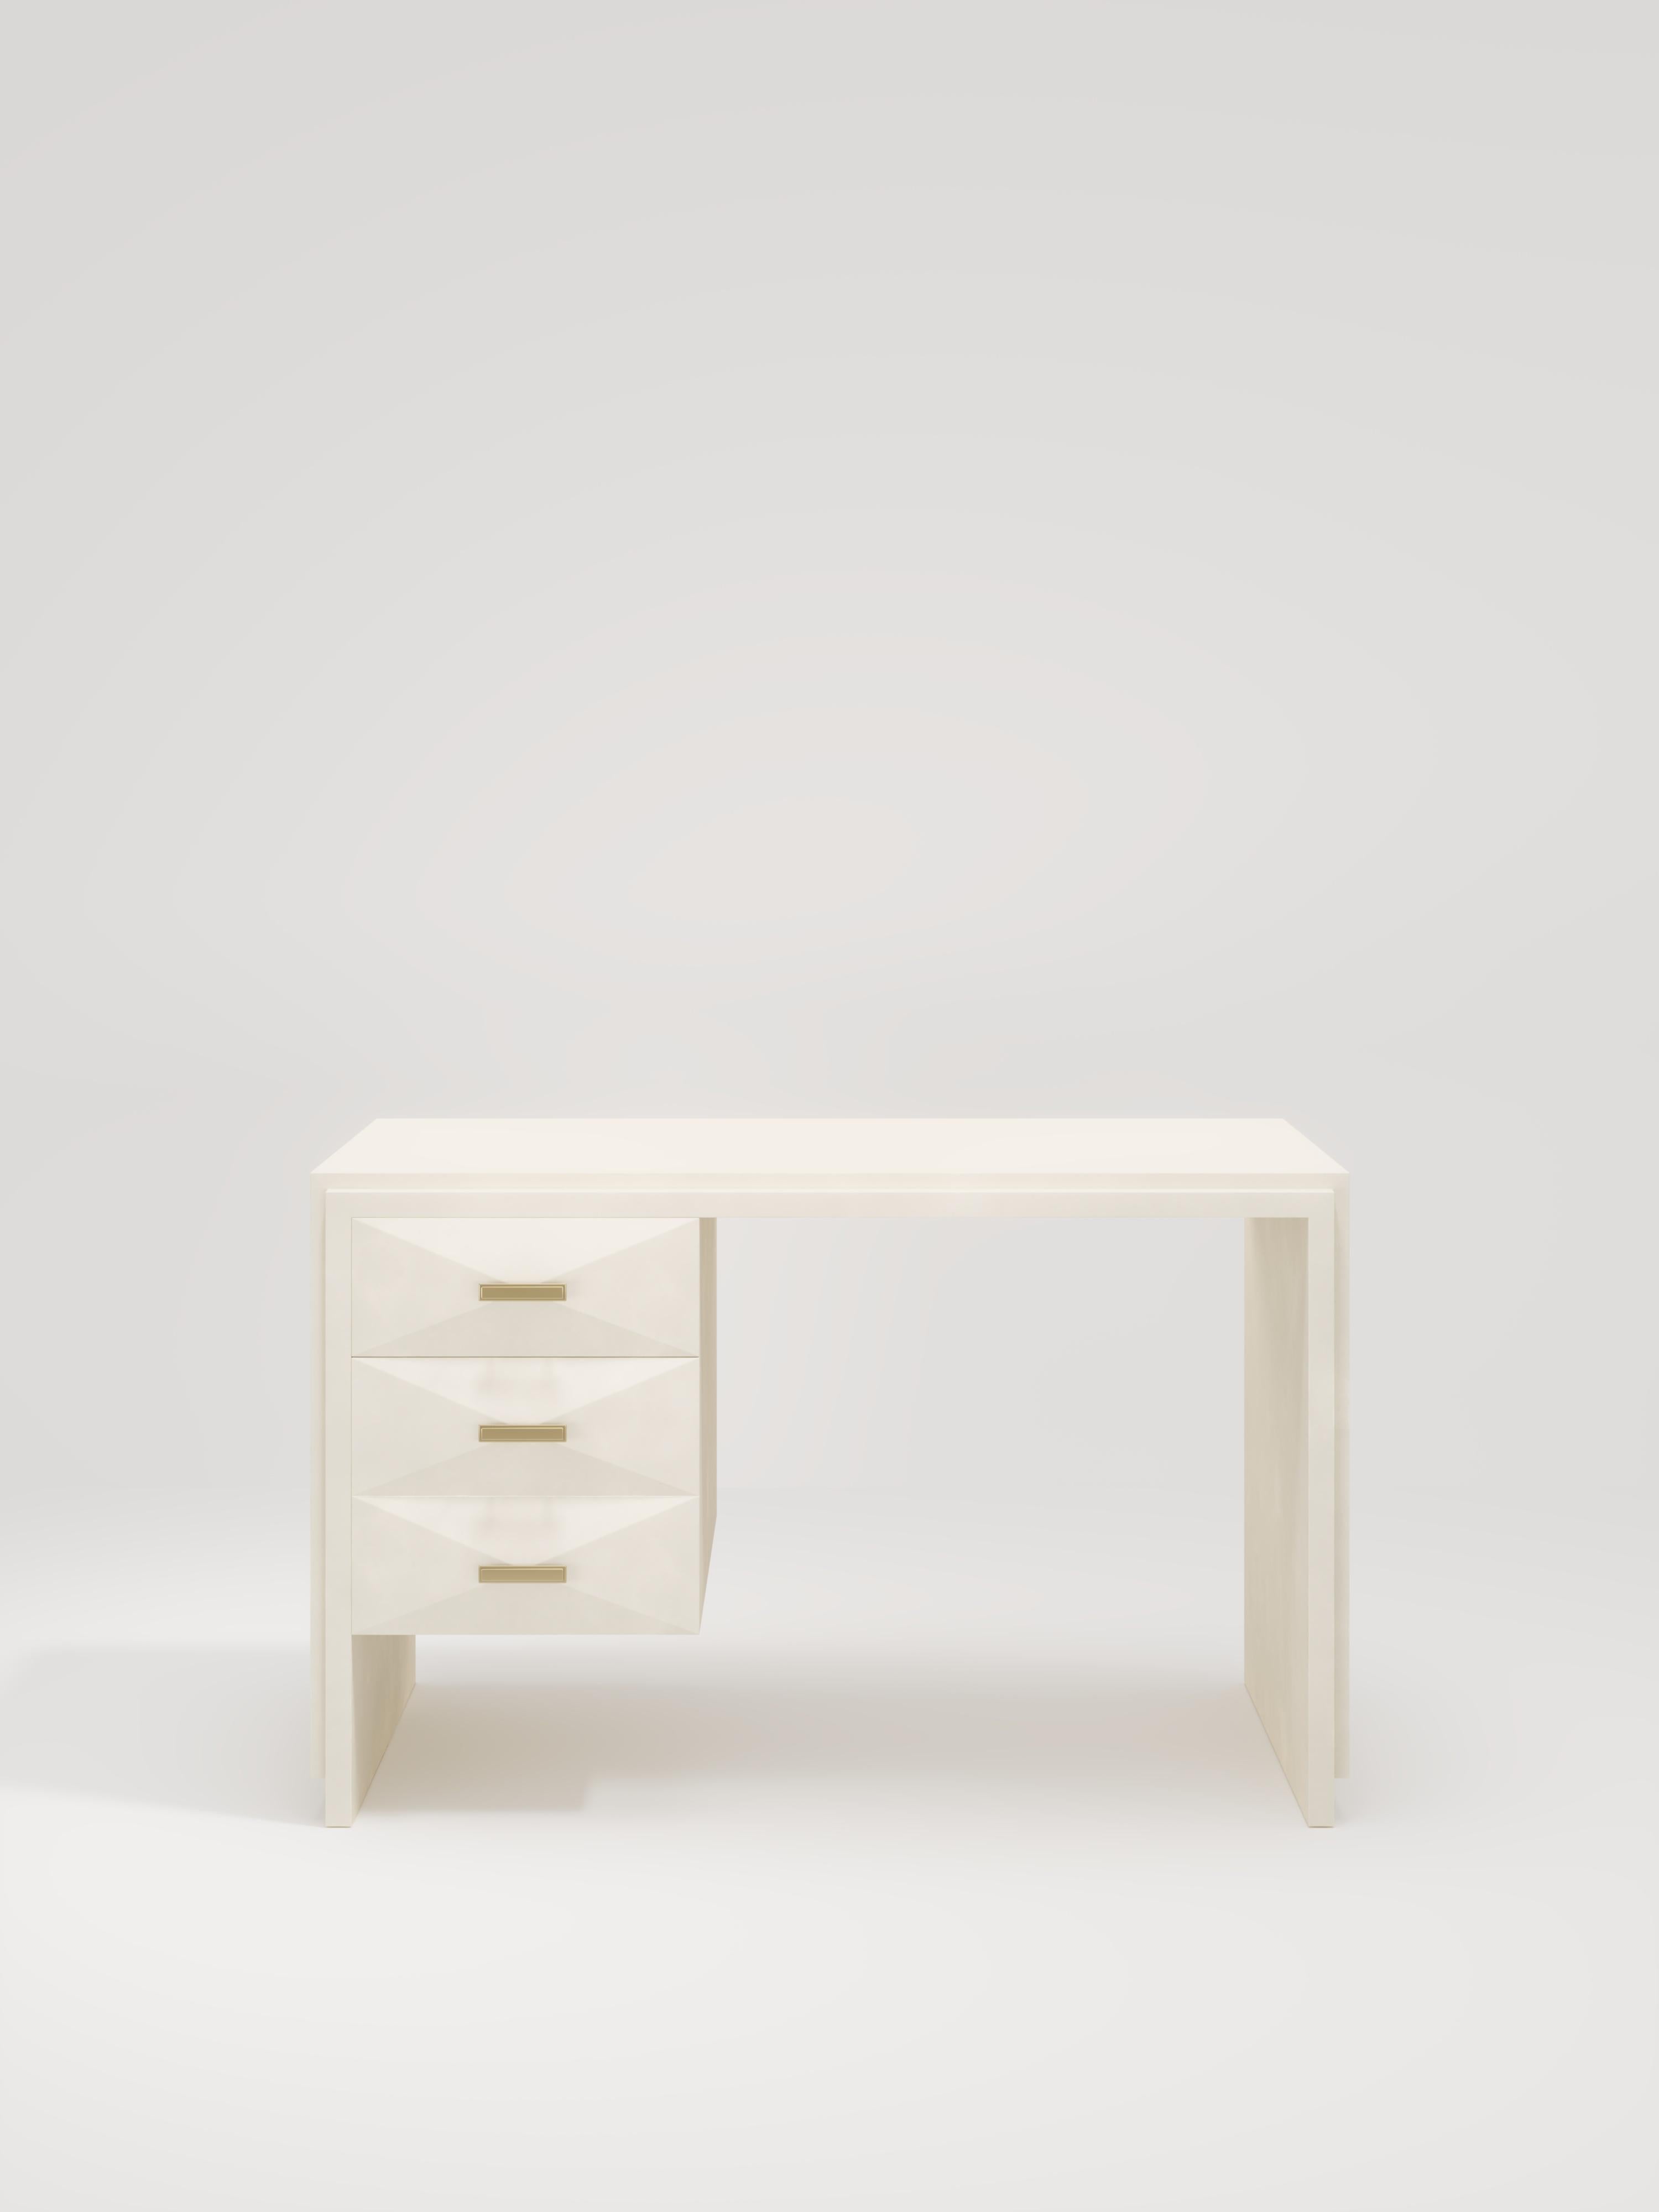 The Iconic Writing Desk is both elegant and minimalist with its classic aesthetic that showcases the purity of the beautiful Augousti craftsmanship. This piece is completely inlaid in cream parchment and includes 3 bevelled drawers on the left side